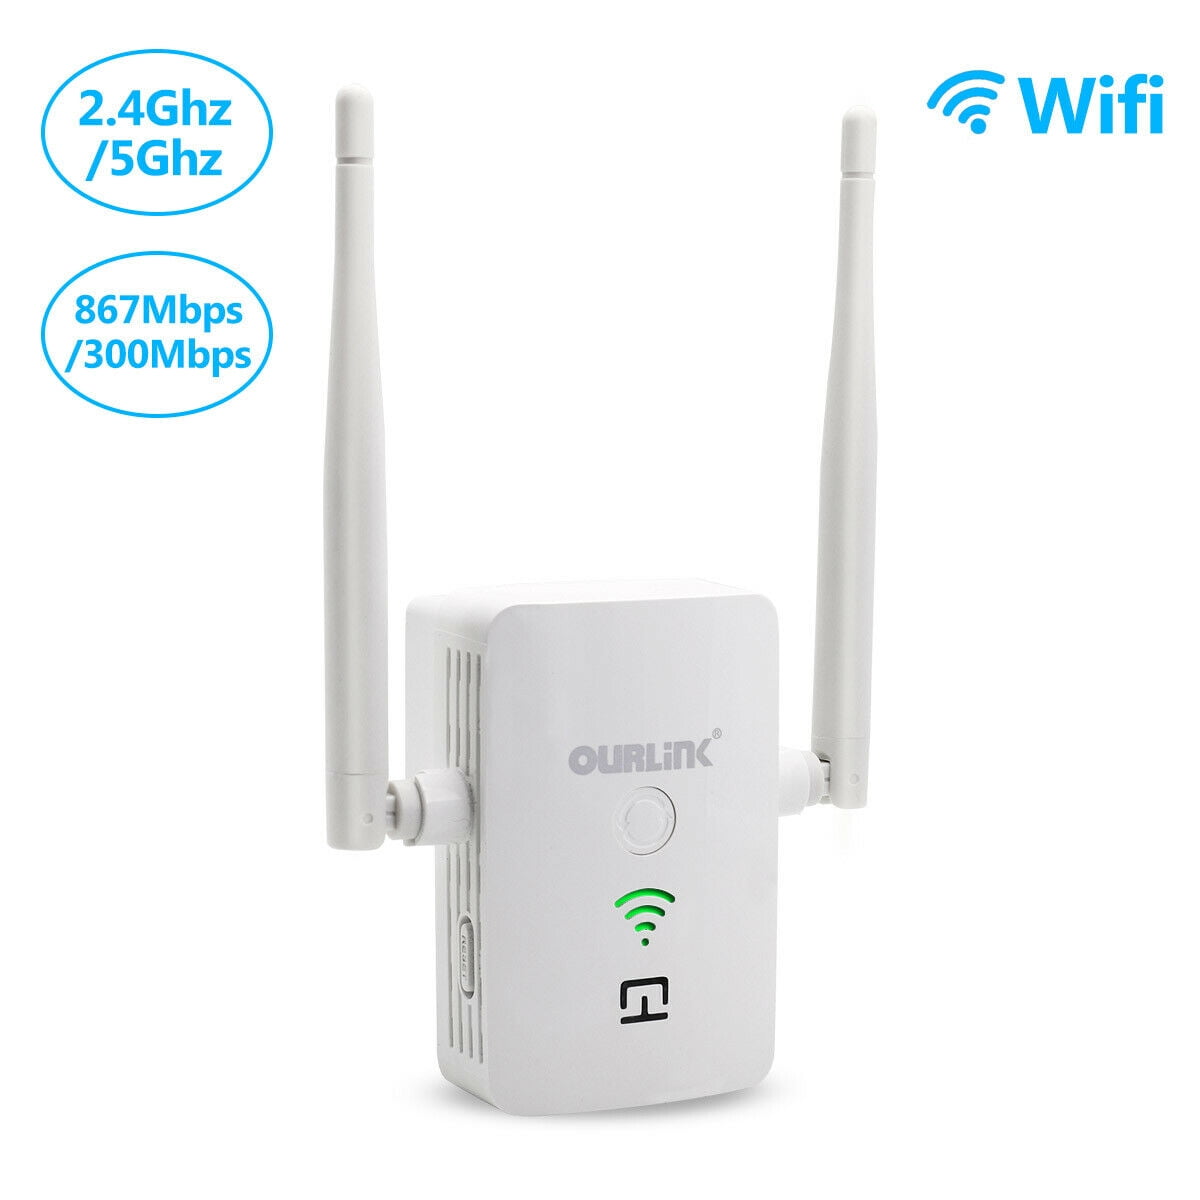 GALAWAY WiFi Booster G1208 Wireless Repeater 1200Mbps/2.4GHz 5 GHz WiFi Extender WiFi Range Booster Four External Antennas Amplifier with Ethernet Ports G1208CC0 